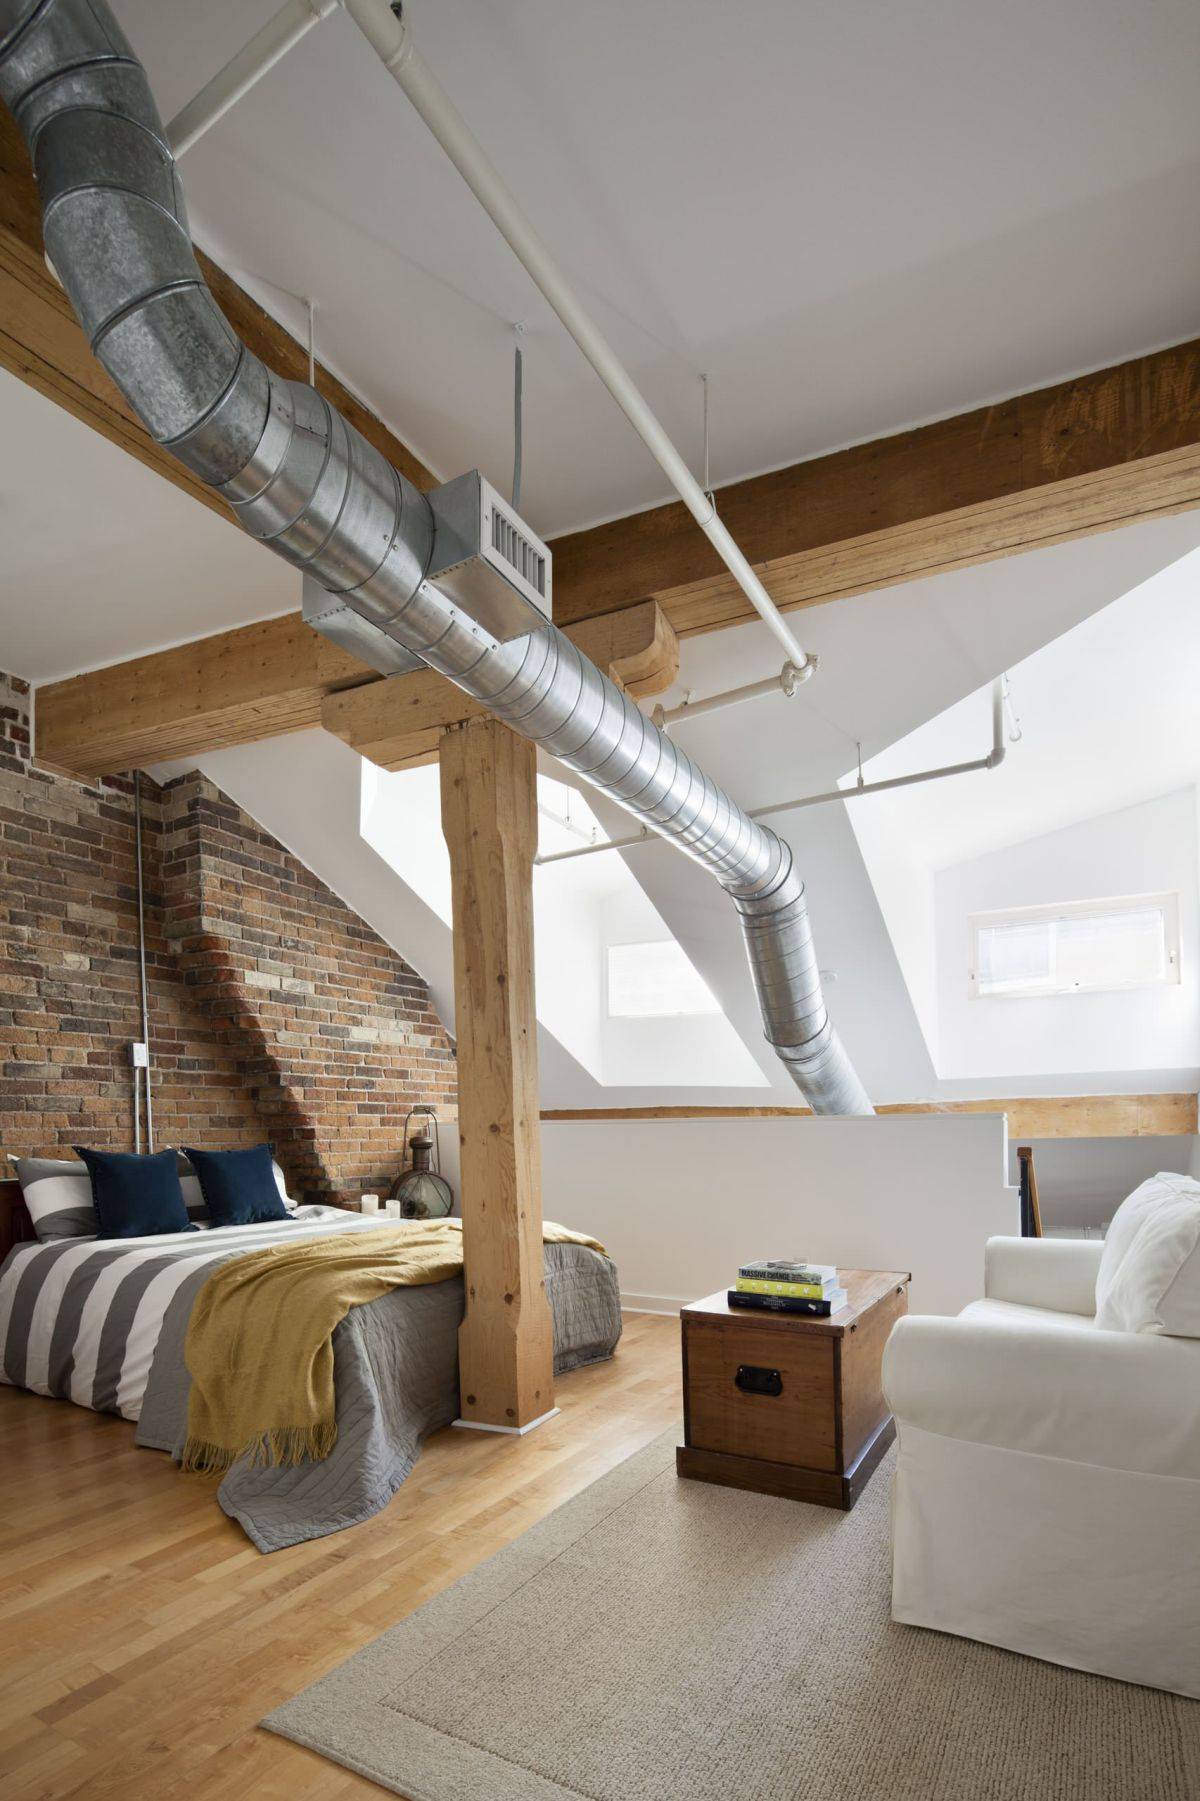 Loft-style bedroom is just perfect for those who love the modern industrial style